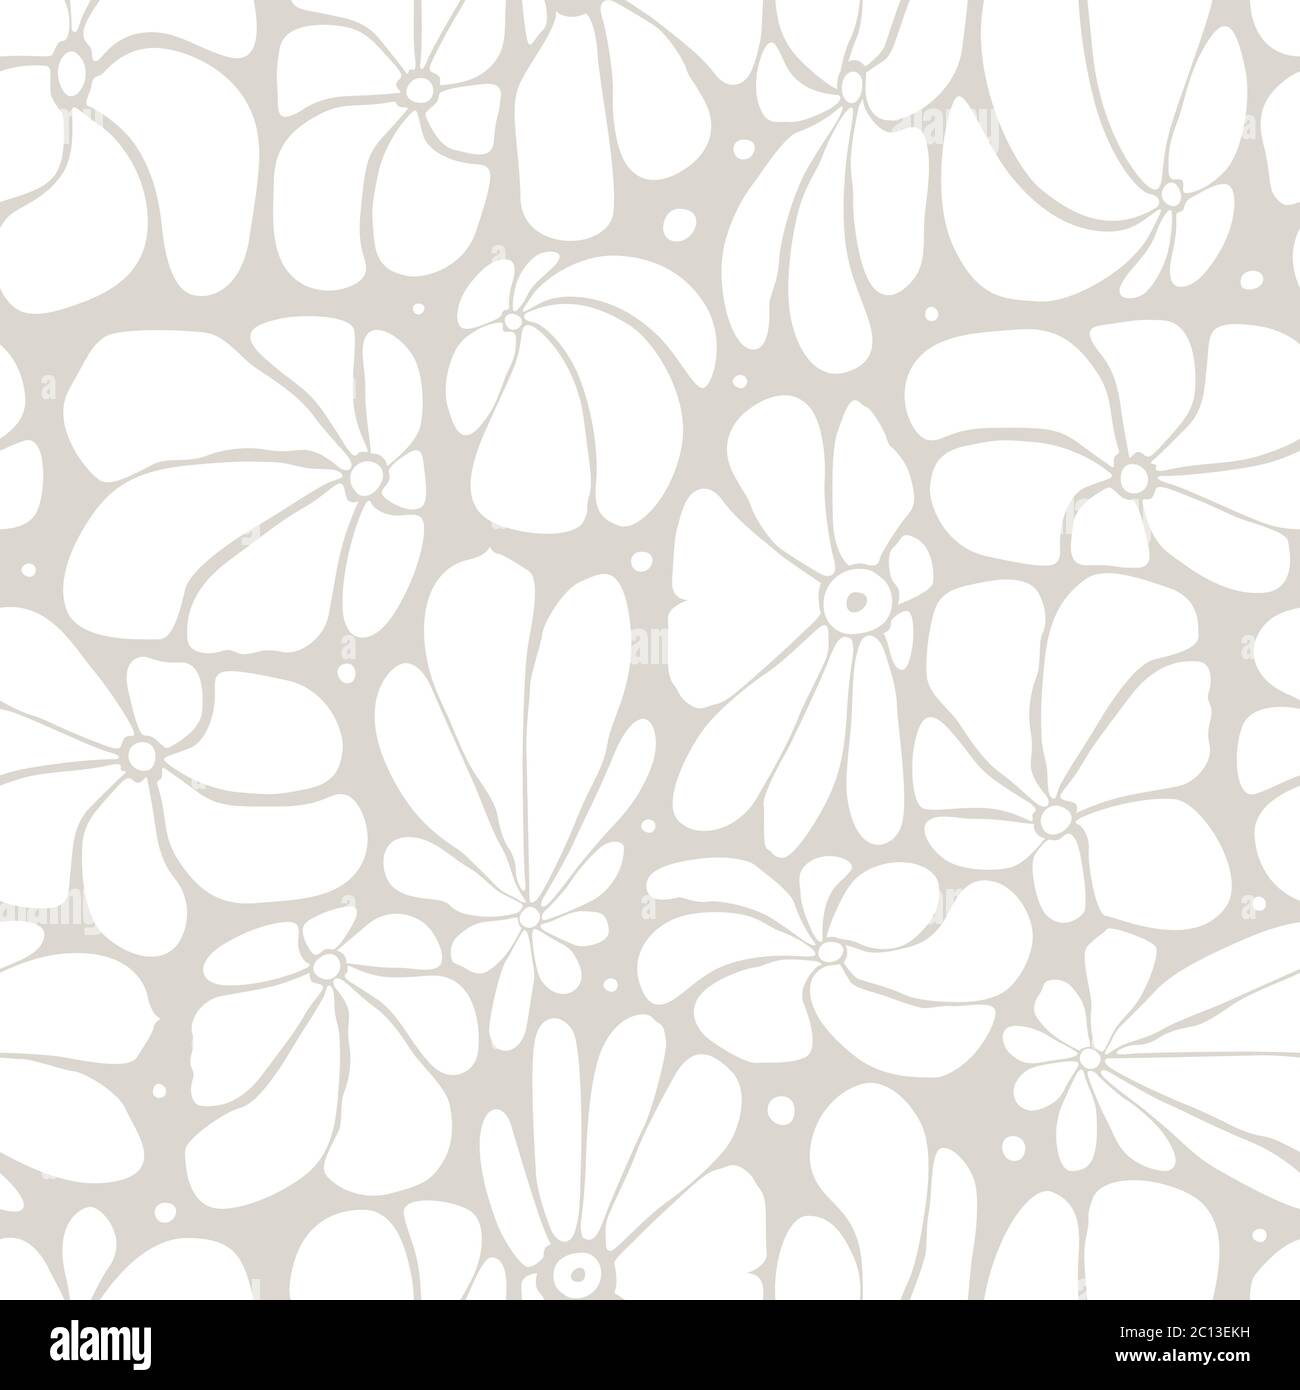 Seamless floral pattern design with stylized large blossoms, retro feeling repeat background perfect for web and print Stock Vector